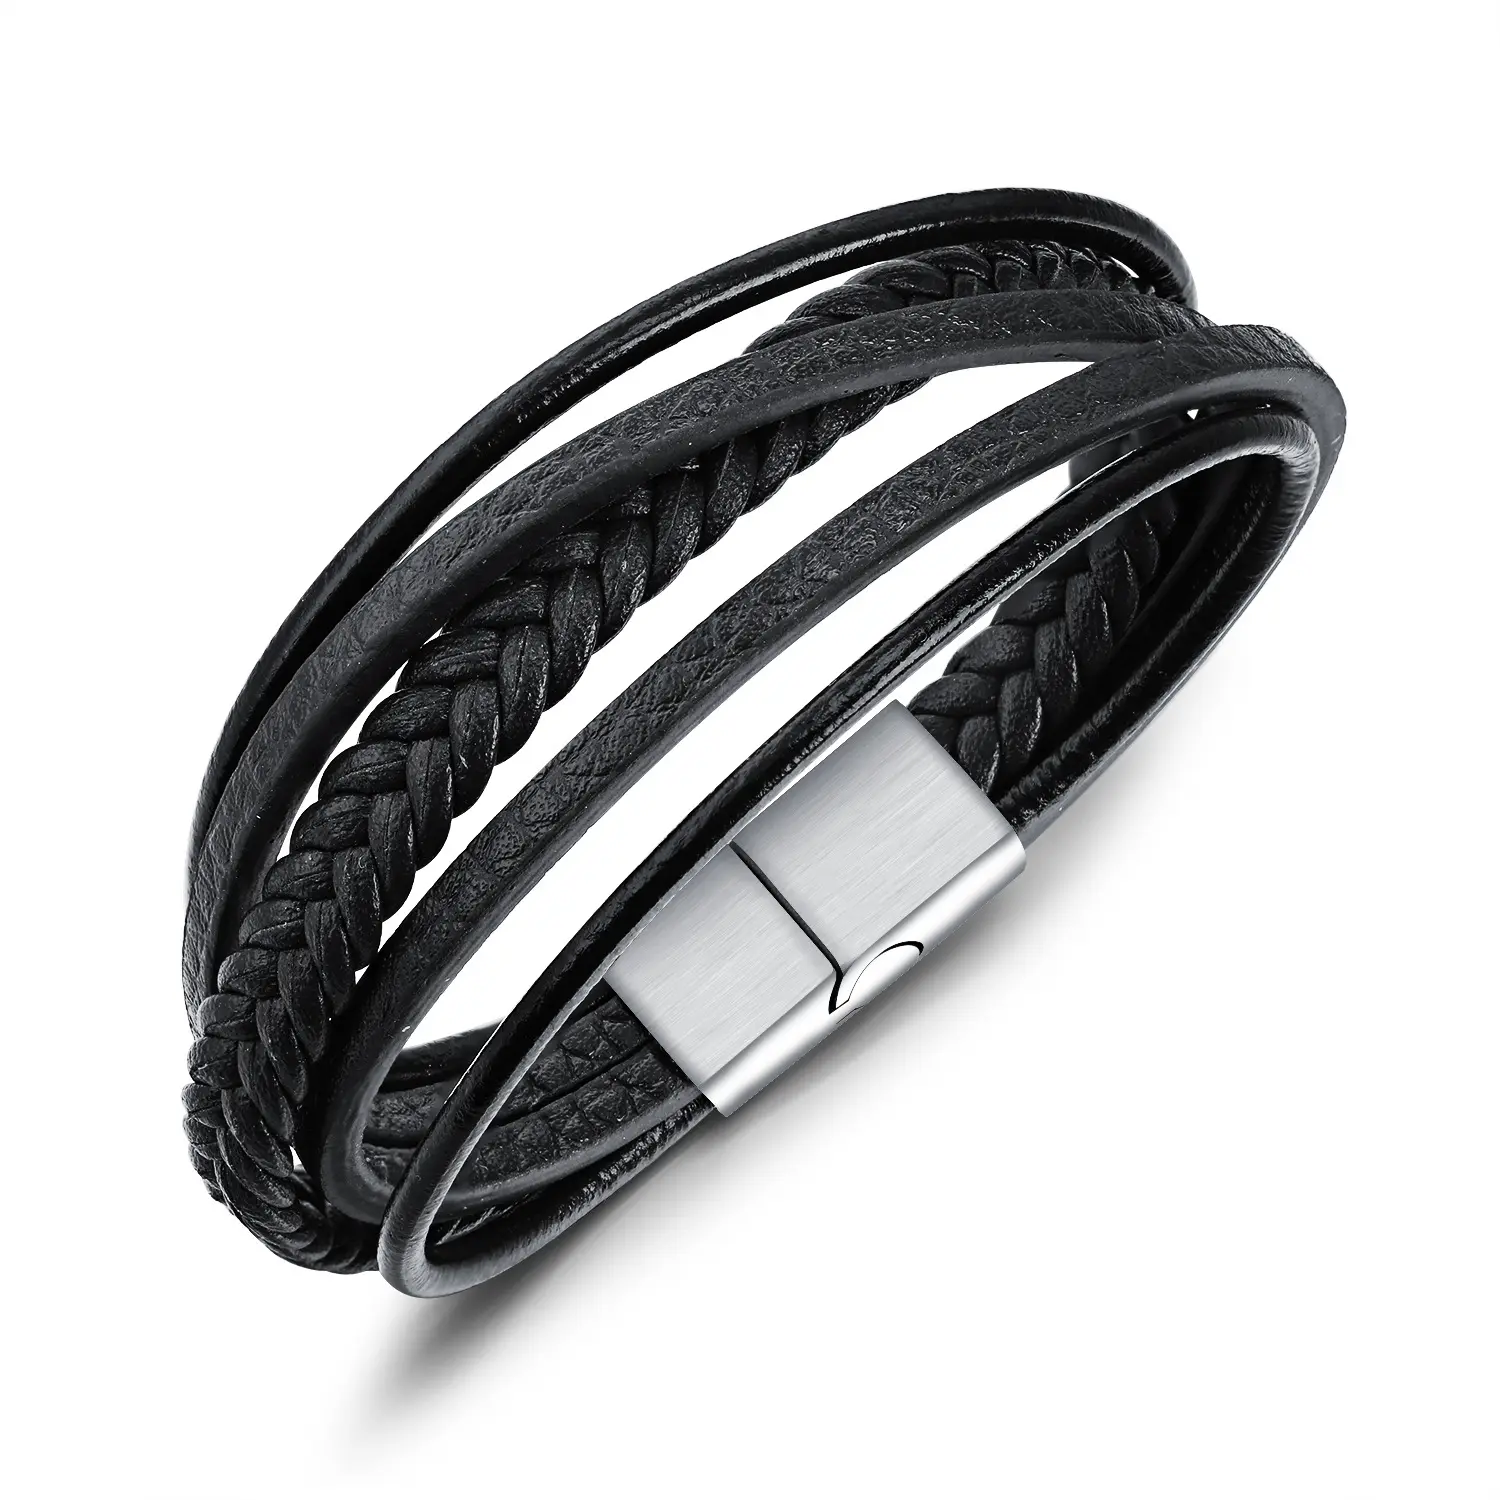 Punk Style Hiphop Handmade For Men Women Magnetic Clasp Wristbands Cuff Wrap Bangle Stainless Steel Braided Leather Bracelet